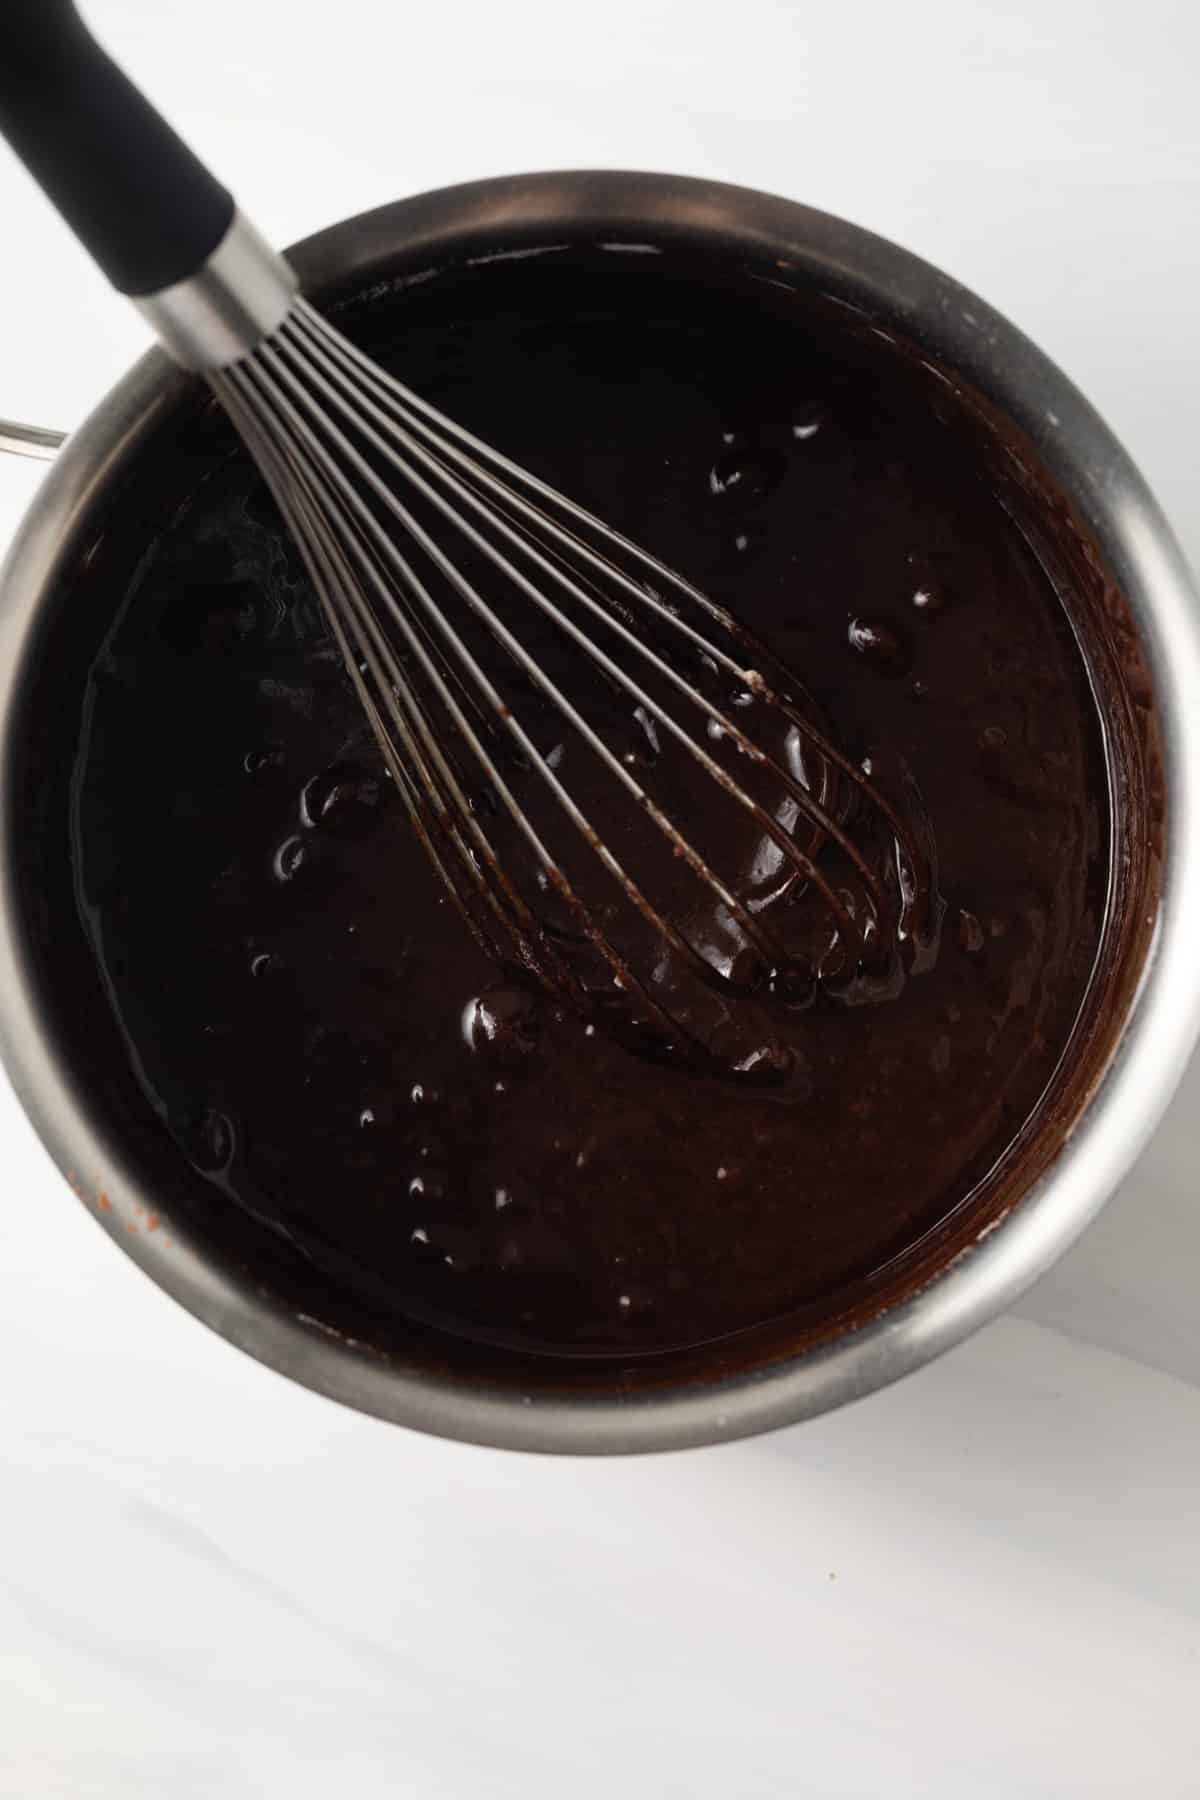 Brownie batter in pot with whisk.